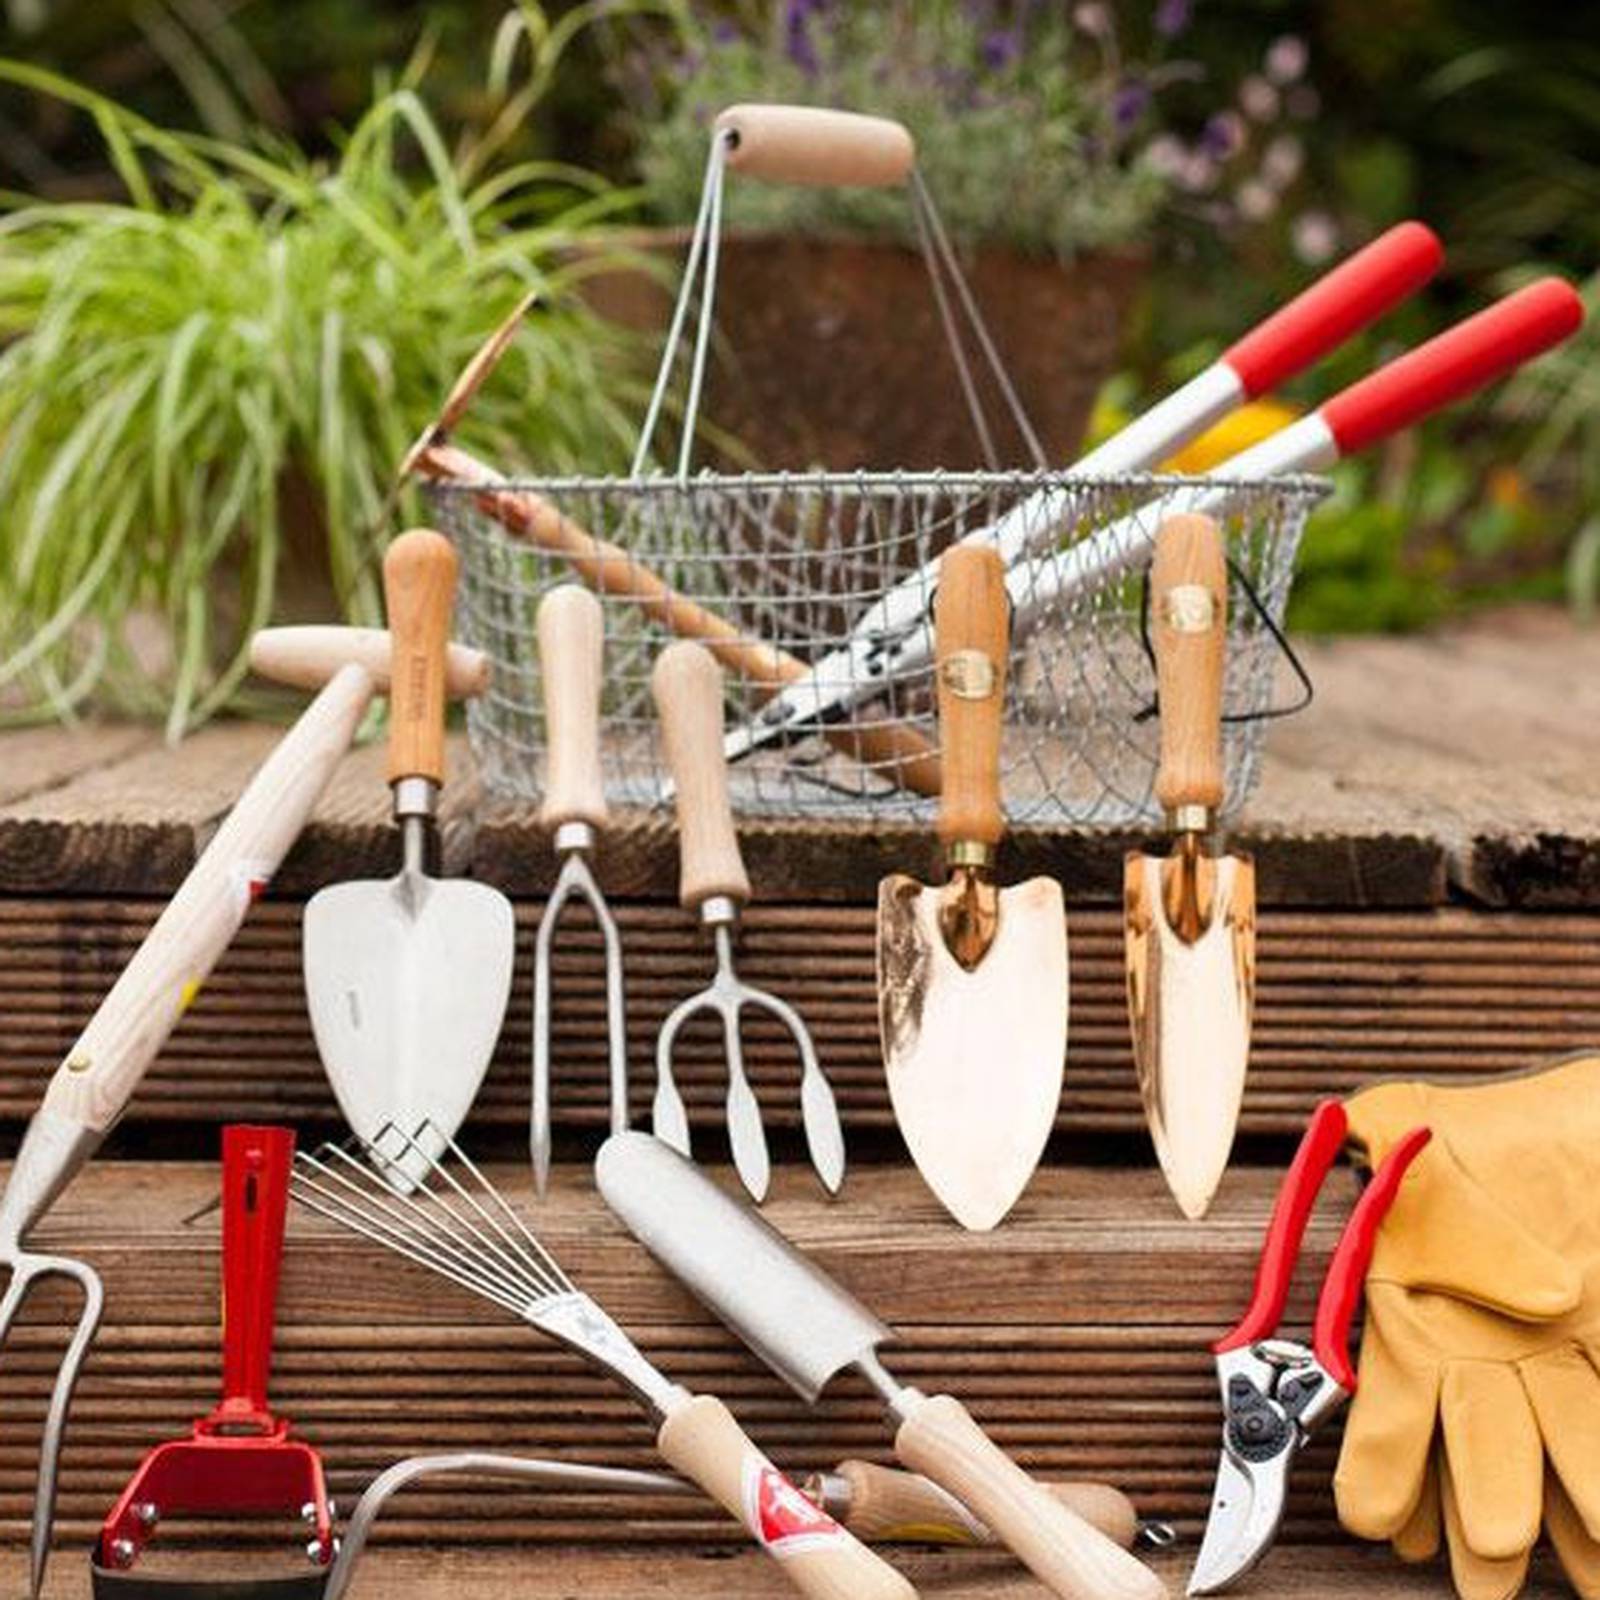 Copper Garden Tools: The Best Choice for Your Gardening Needs